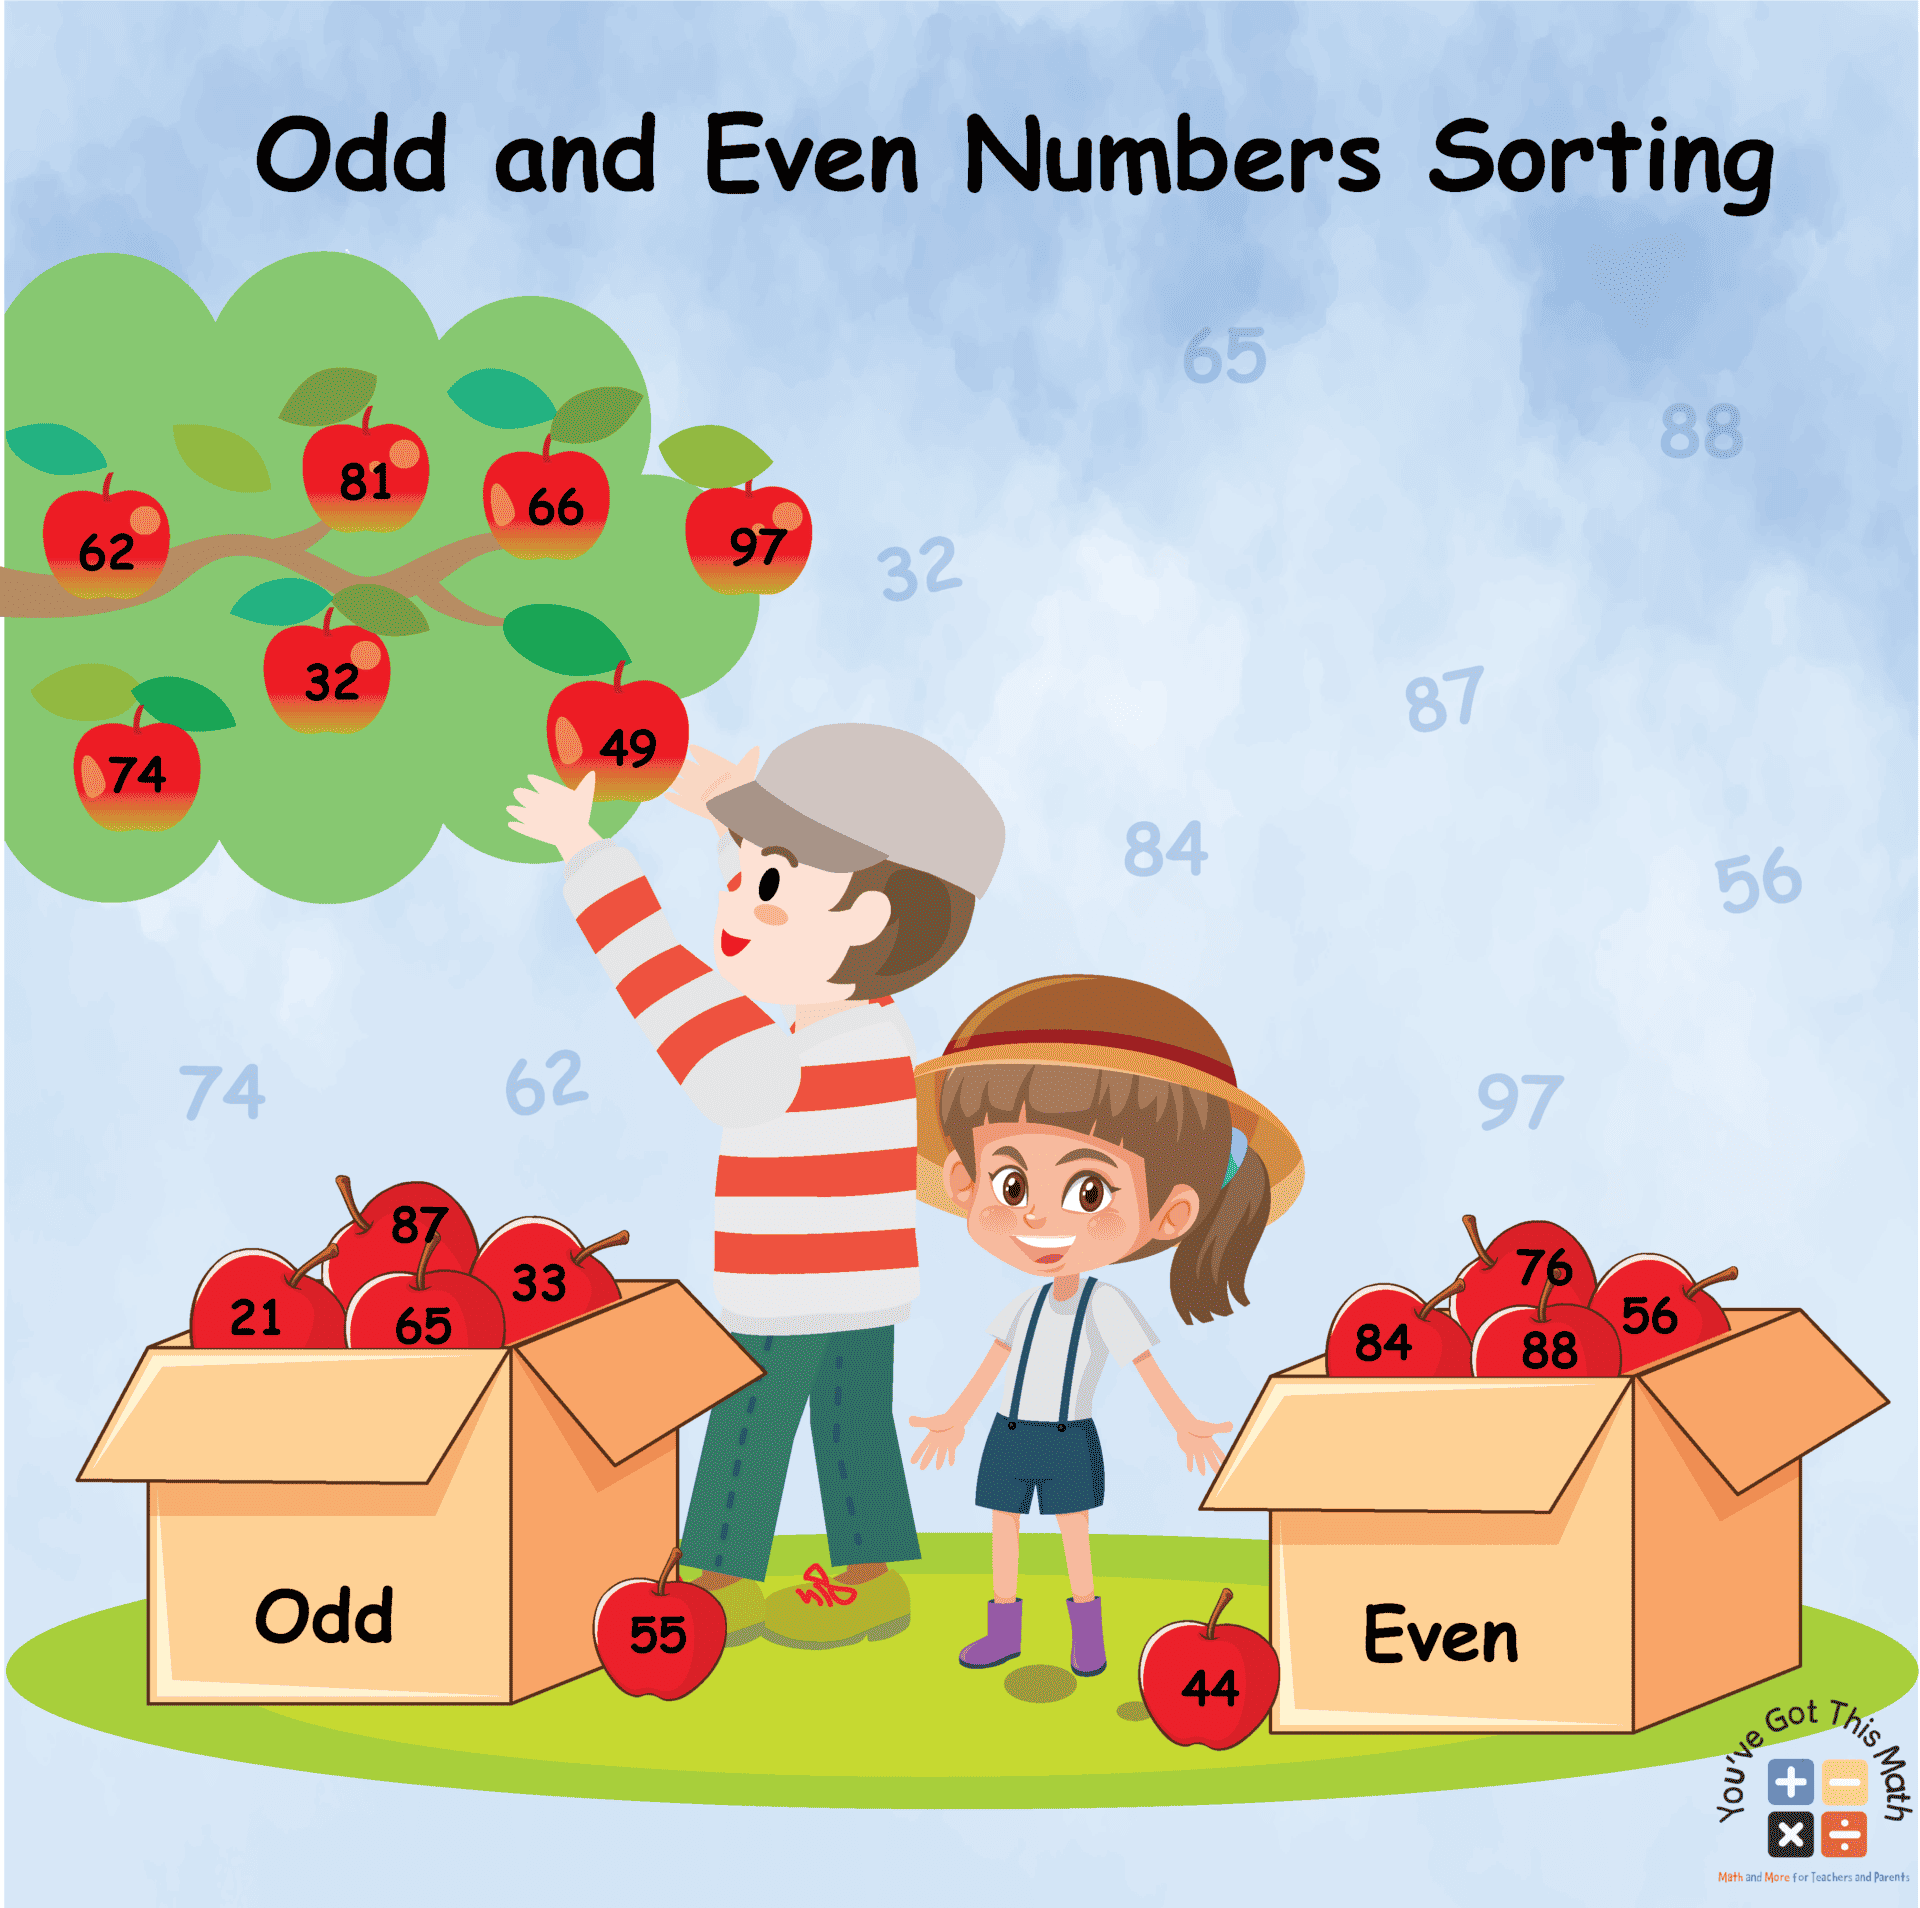 Odd and Even Numbers Sorting Overview